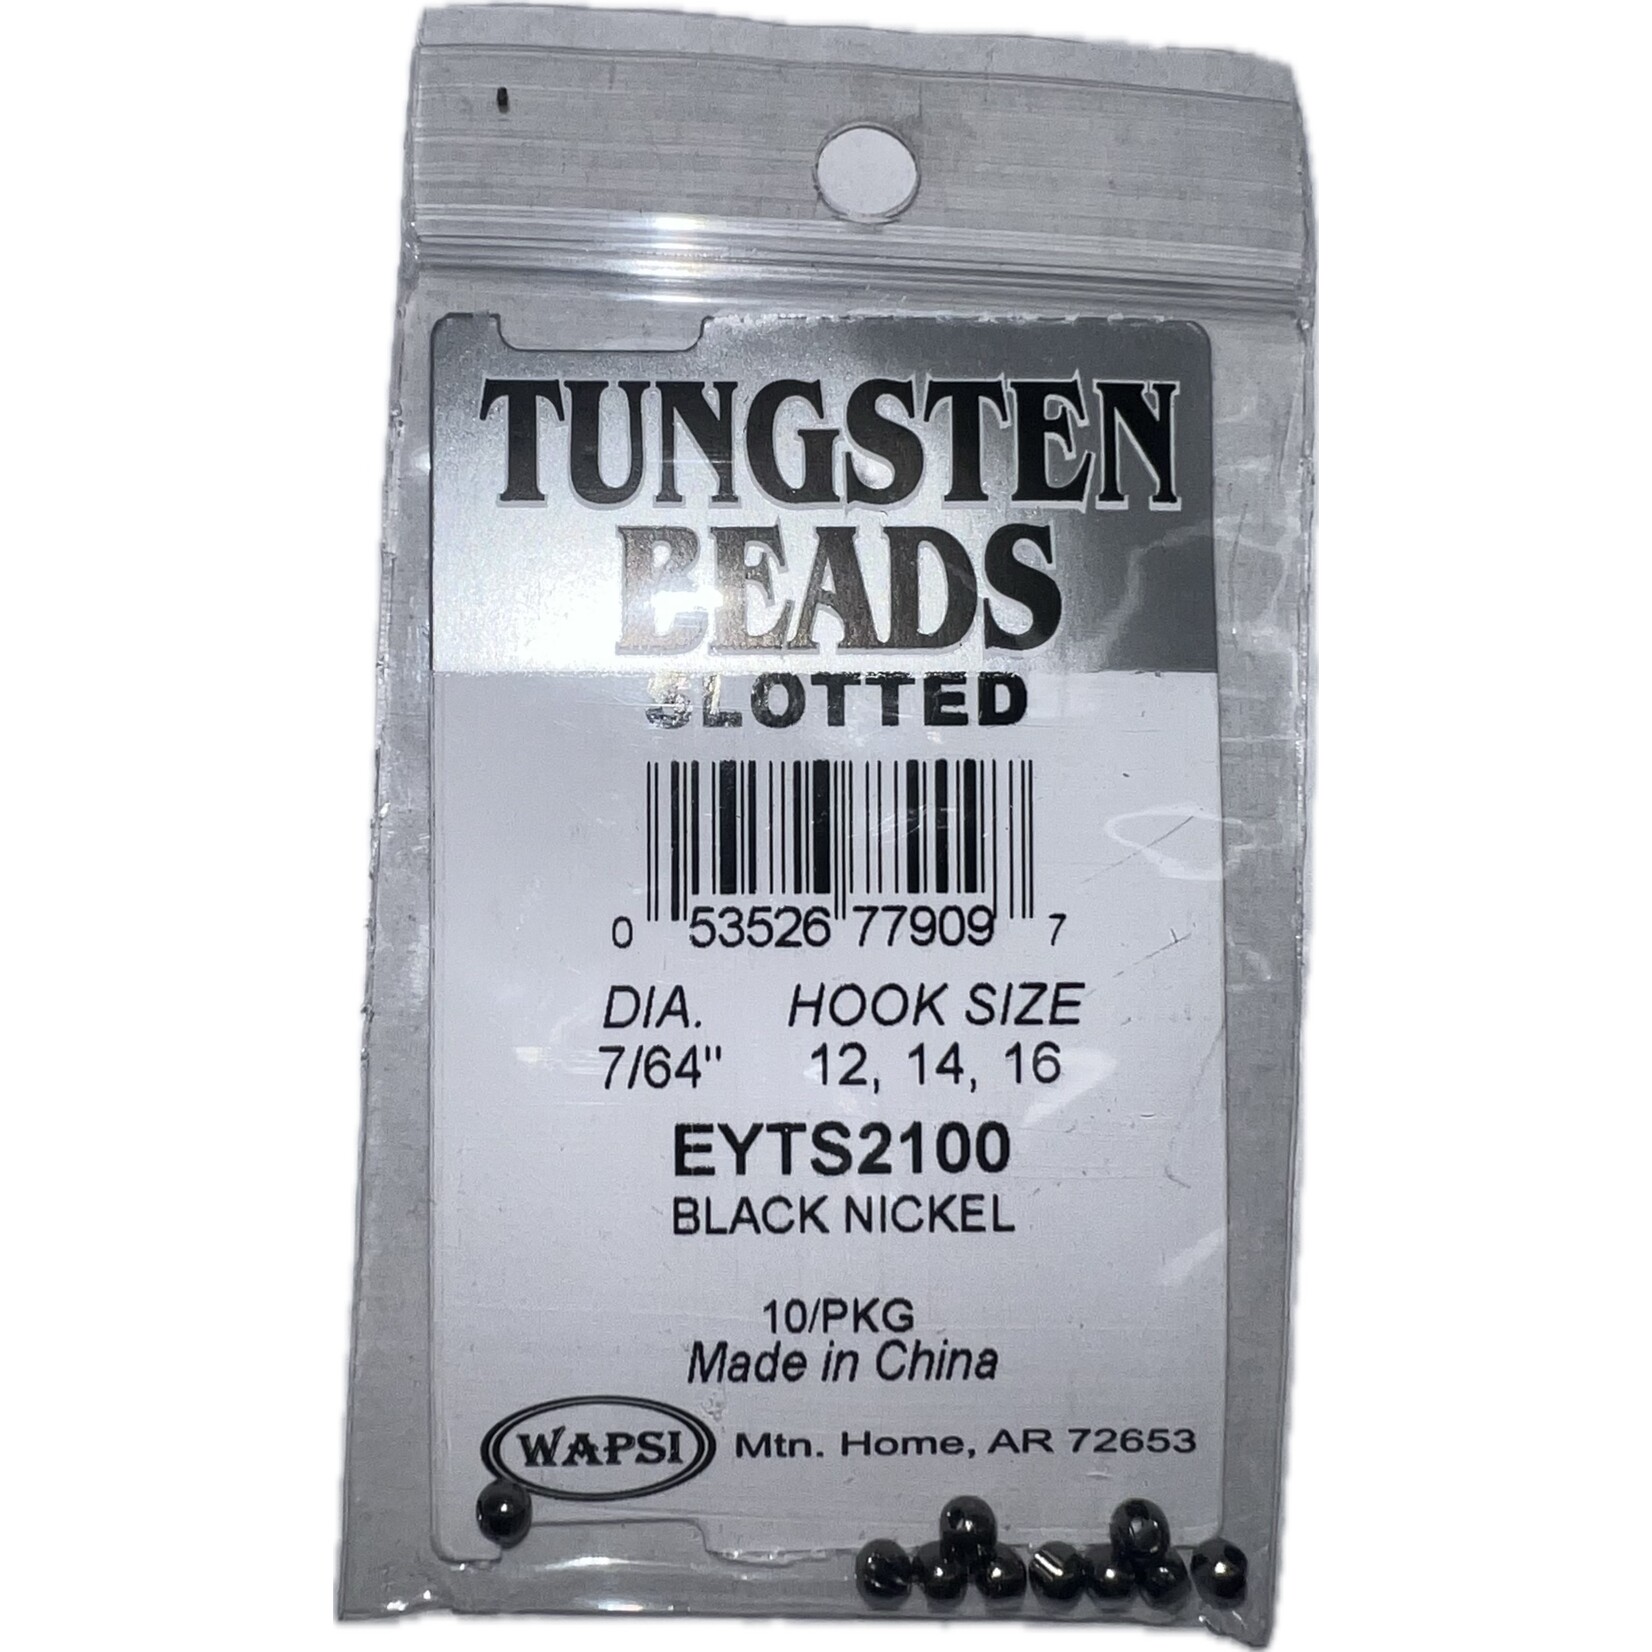 SLOTTED TUNGSTEN BEADS